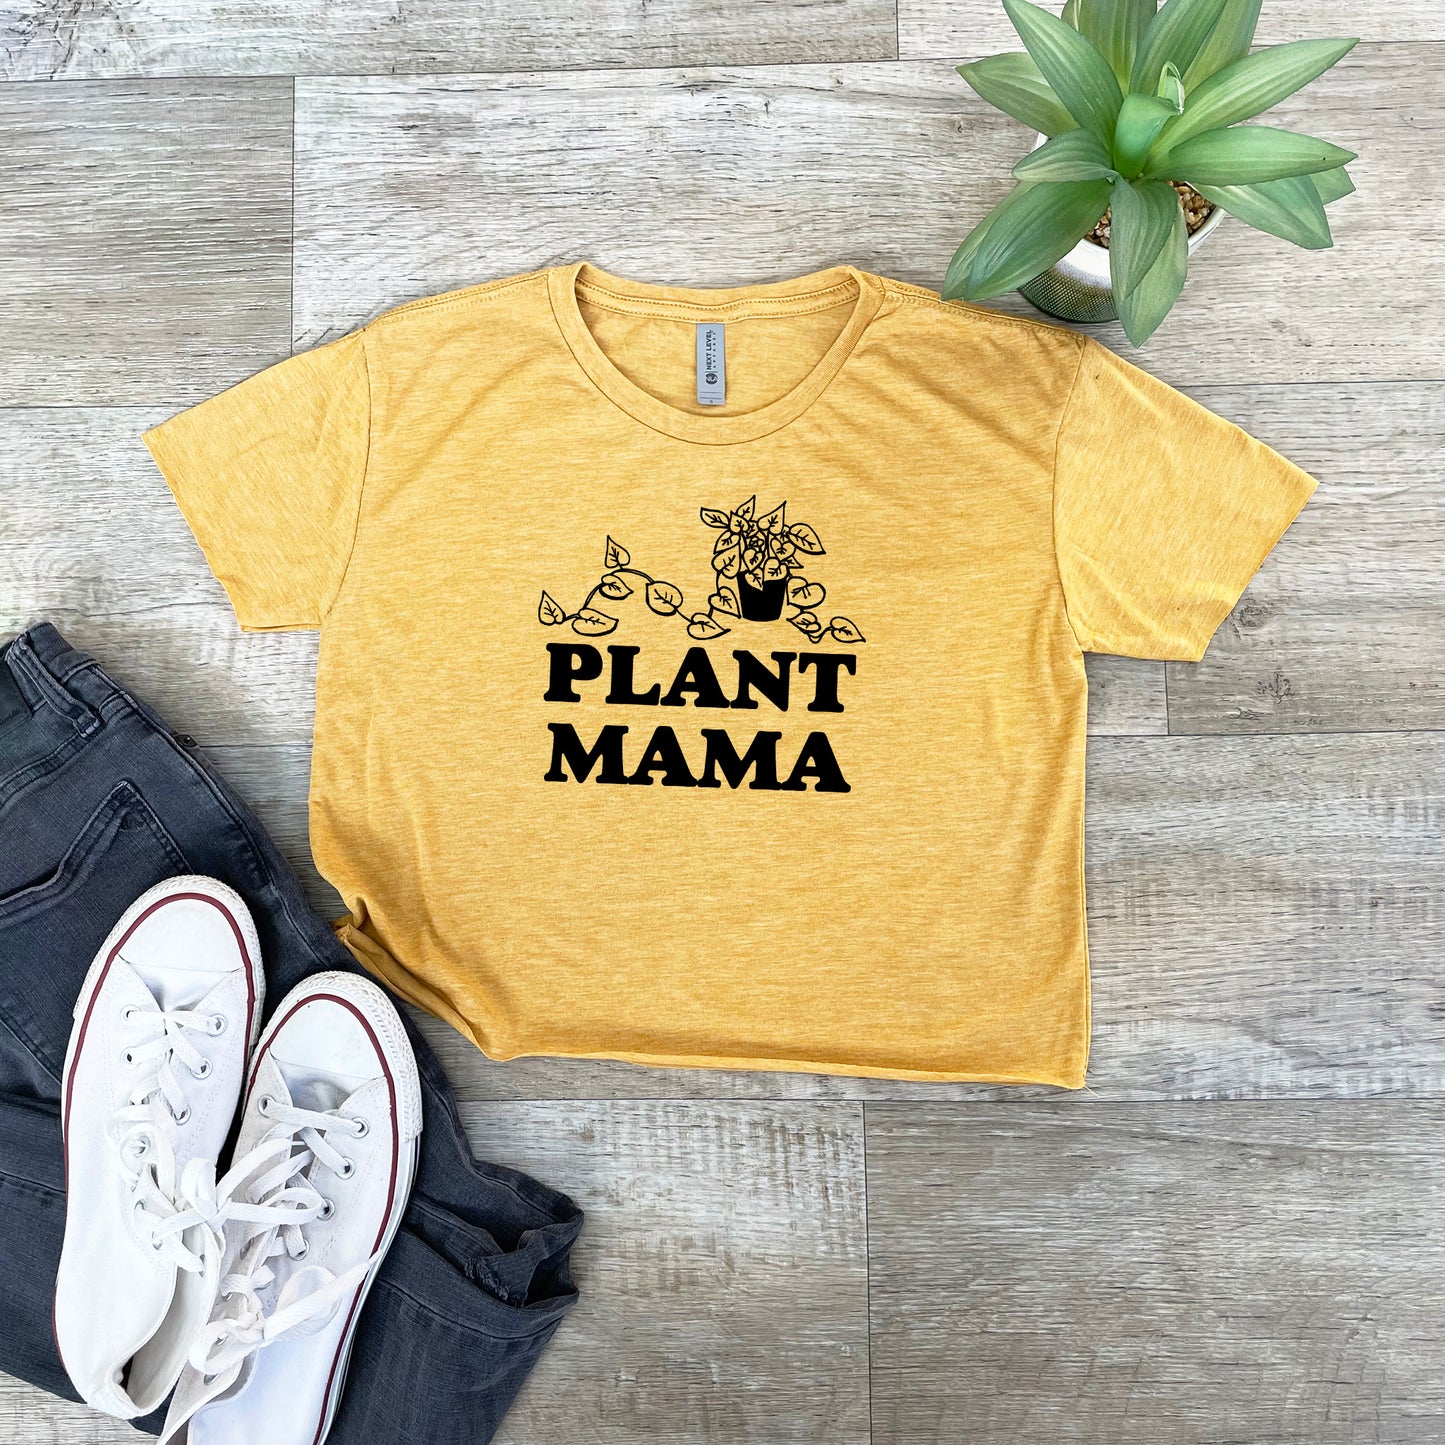 Plant Mama - Women's Crop Tee - Heather Gray or Gold